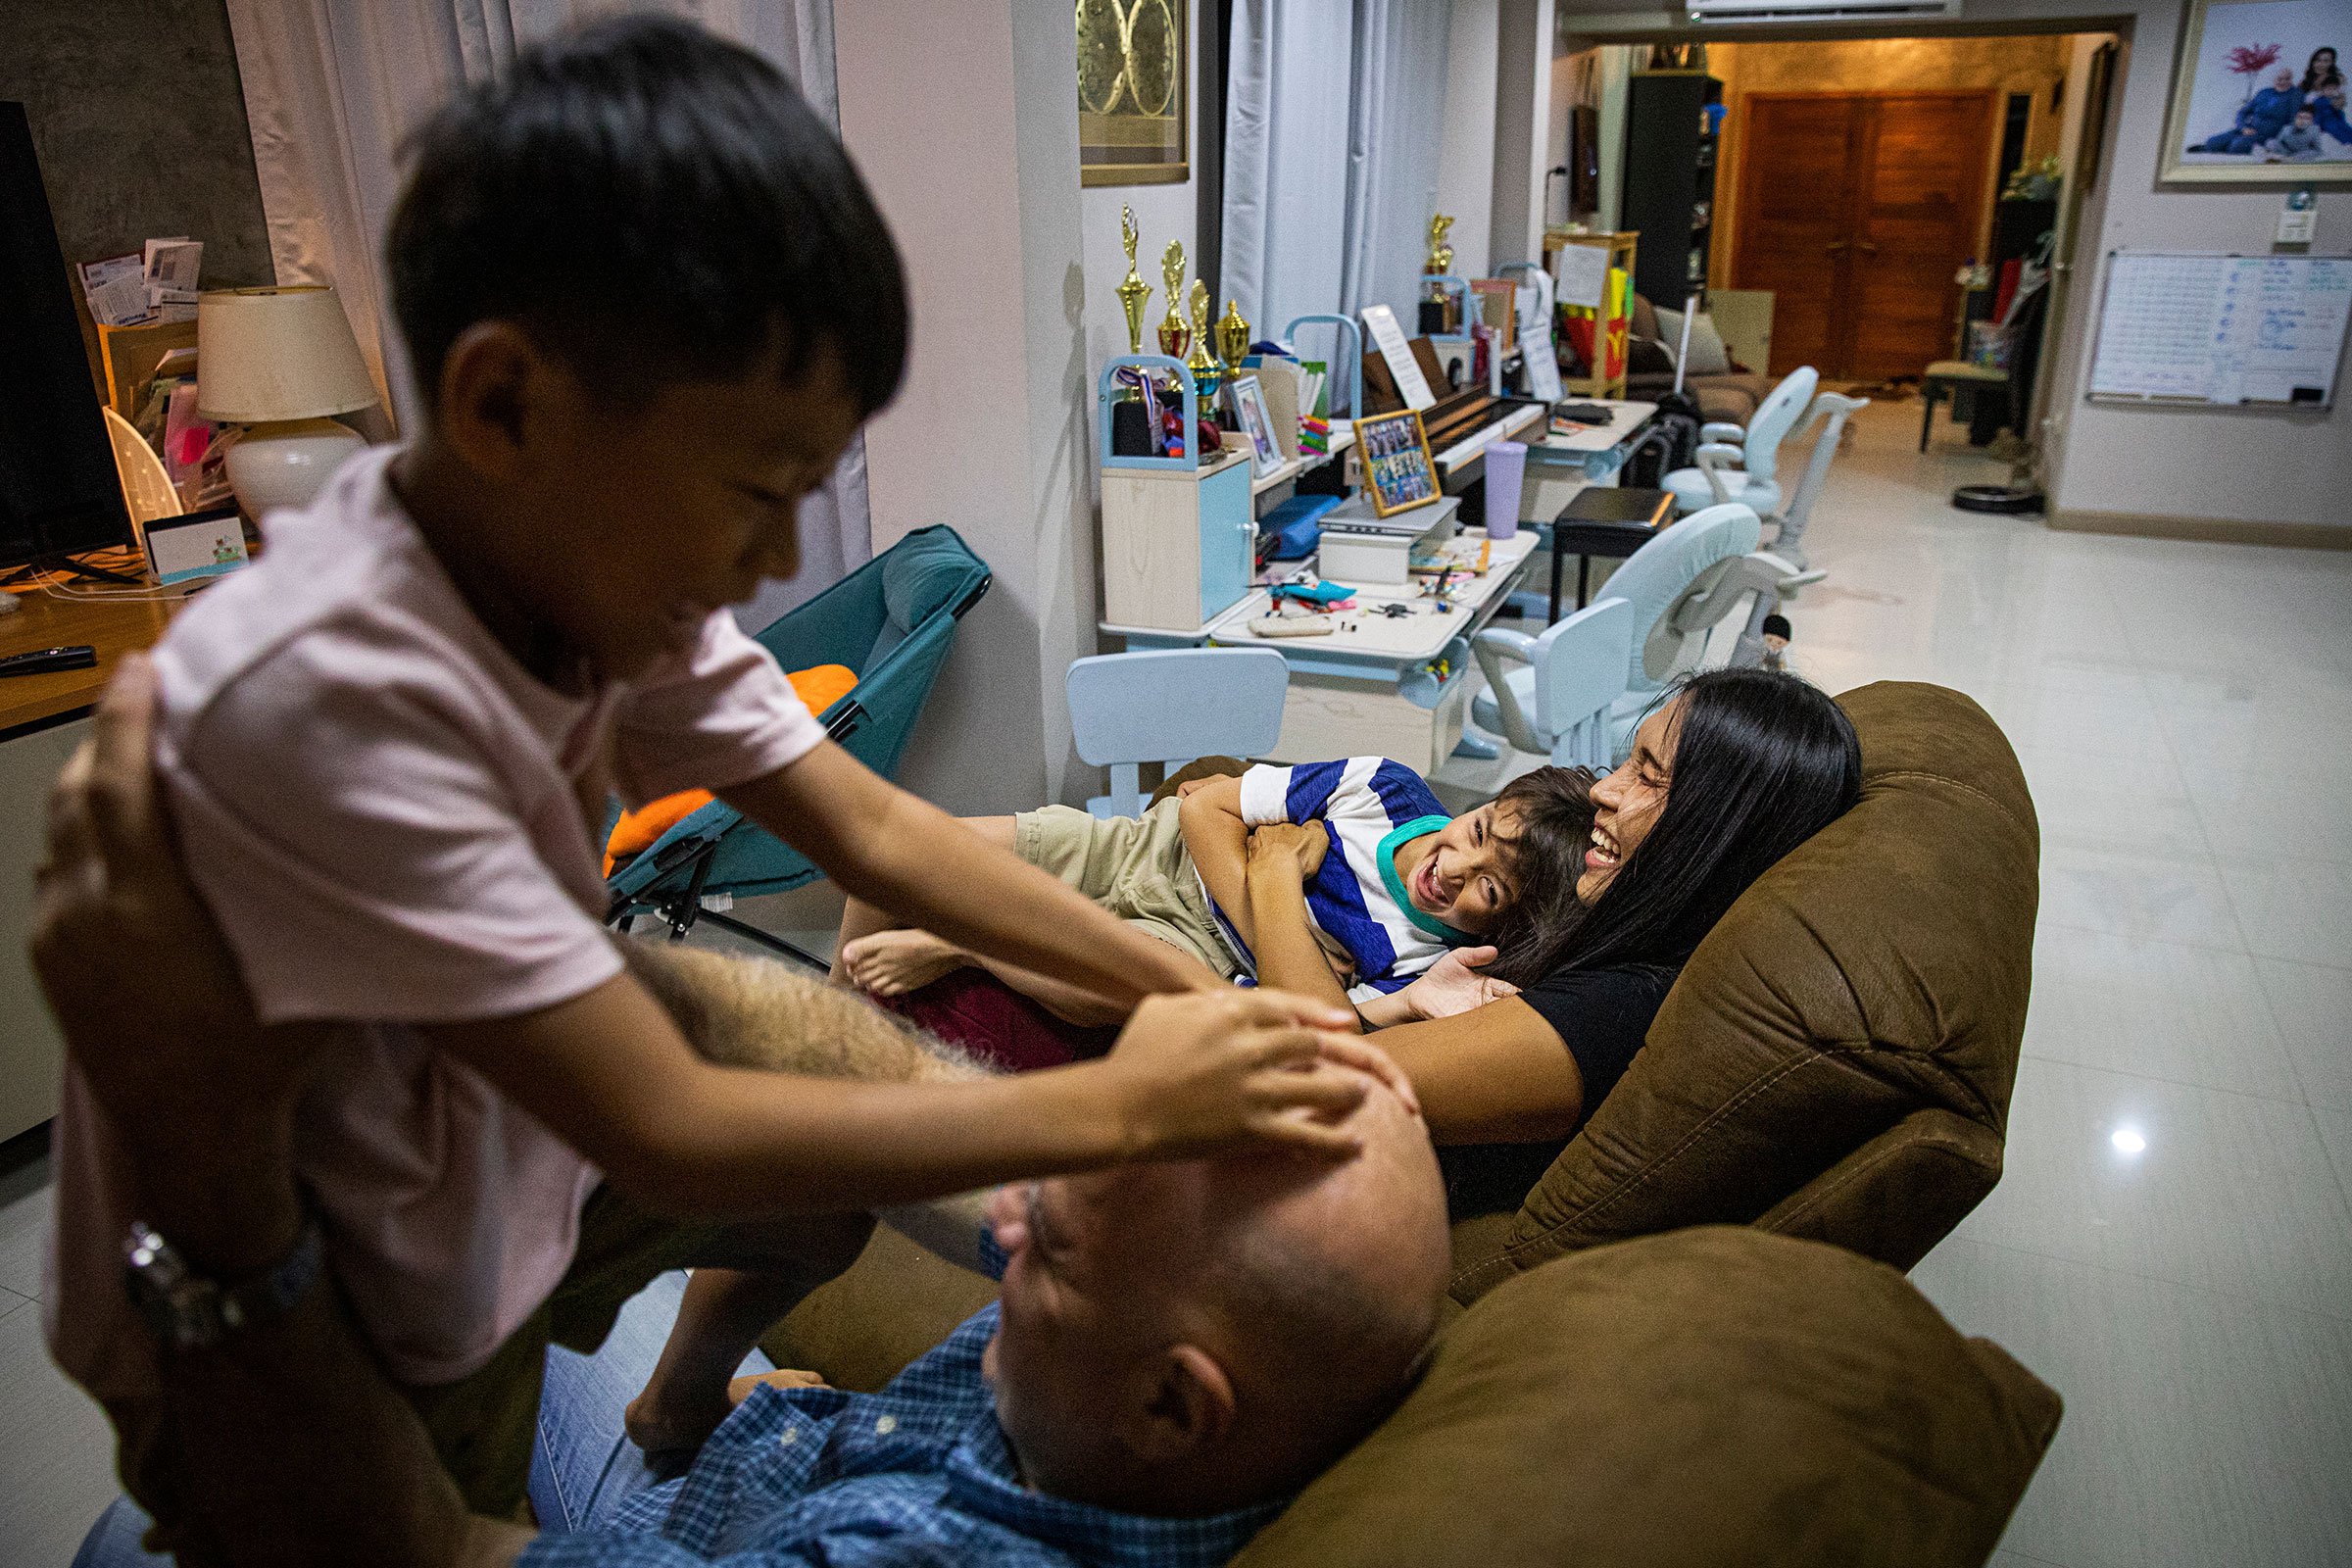 Ariya "Gina" Milintanapa and her partner, Lee Battia, play with their children, Chene and Charlie, in their family home on July 12, 2022 in Bangkok, Thailand.  Ariya "Gina" Milintanapa, a Thai transgender woman, and her American partner, Lee Battia, live in Bangkok, Thailand with their two children, Chene, 8, and Charlie, 6. Although the couple has been together for nearly 20 years, due to the country's conservative marriage laws, Gina and Lee have been unable to officially marry in Thailand, leading to struggles over joint guardianship of their two children. Under current laws, Lee currently has guardianship rights to Chene and Gina has guardianship rights to Charlie. While globally Thailand is considered an inclusive and accepting country for LGBTQ communities and tourists, those living in Thailand struggle for equal rights as courts historically ruled against same-sex marriage. Couples like Gina and Lee hold out hope for joint custody as Thailand's parliament preliminarily approved a bill to recognize same-sex marriage on June 15, 2022. Photo by Lauren DeCicca for TIME